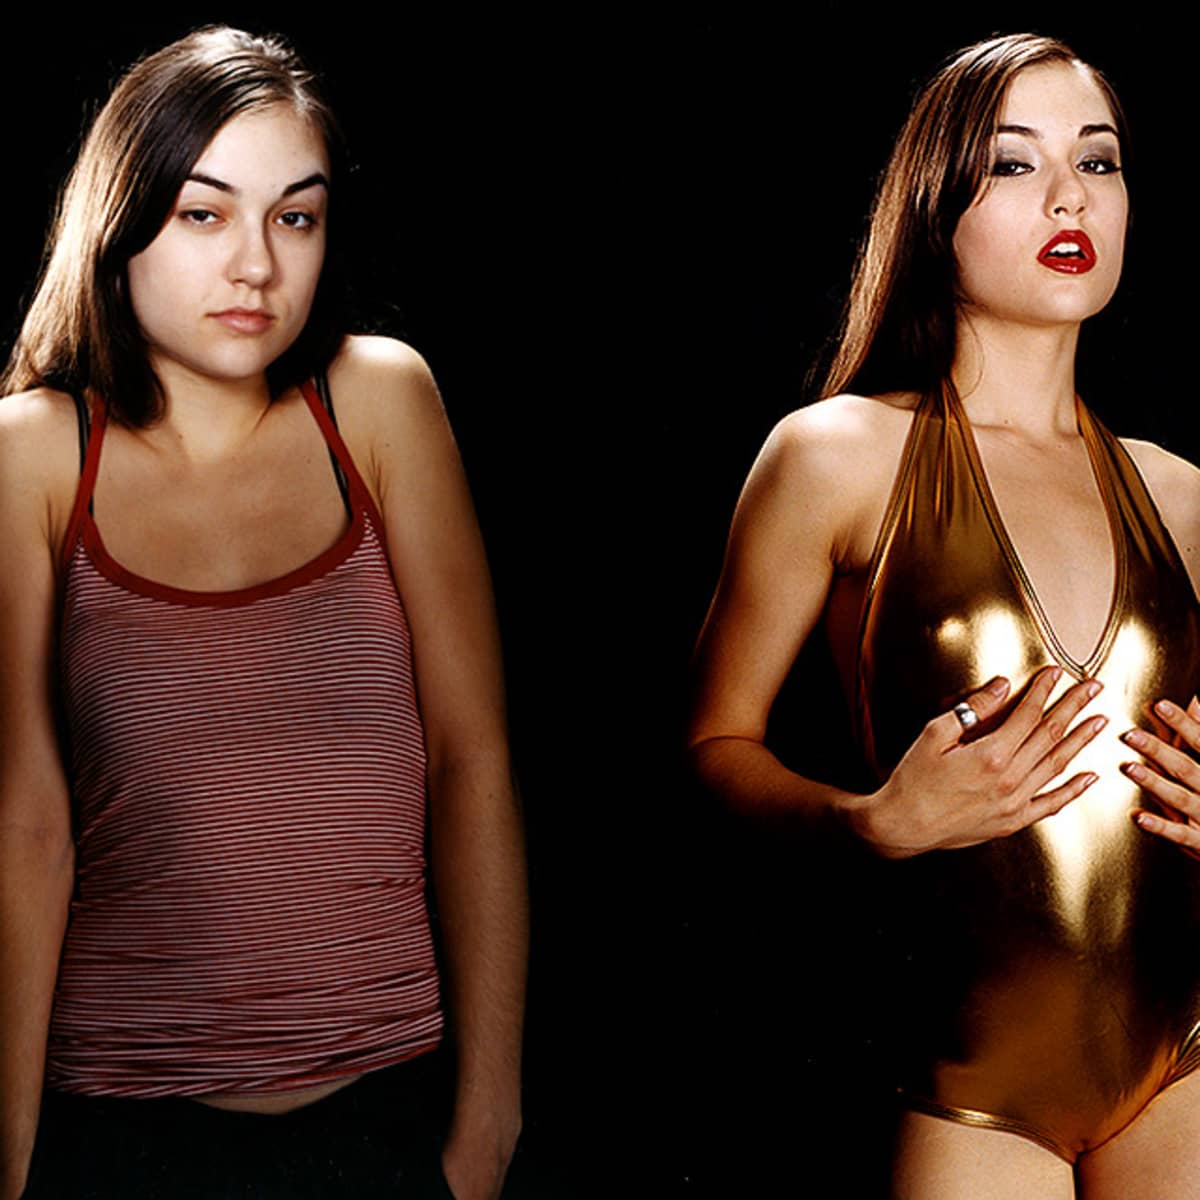 Sasha grey punched in the stomach